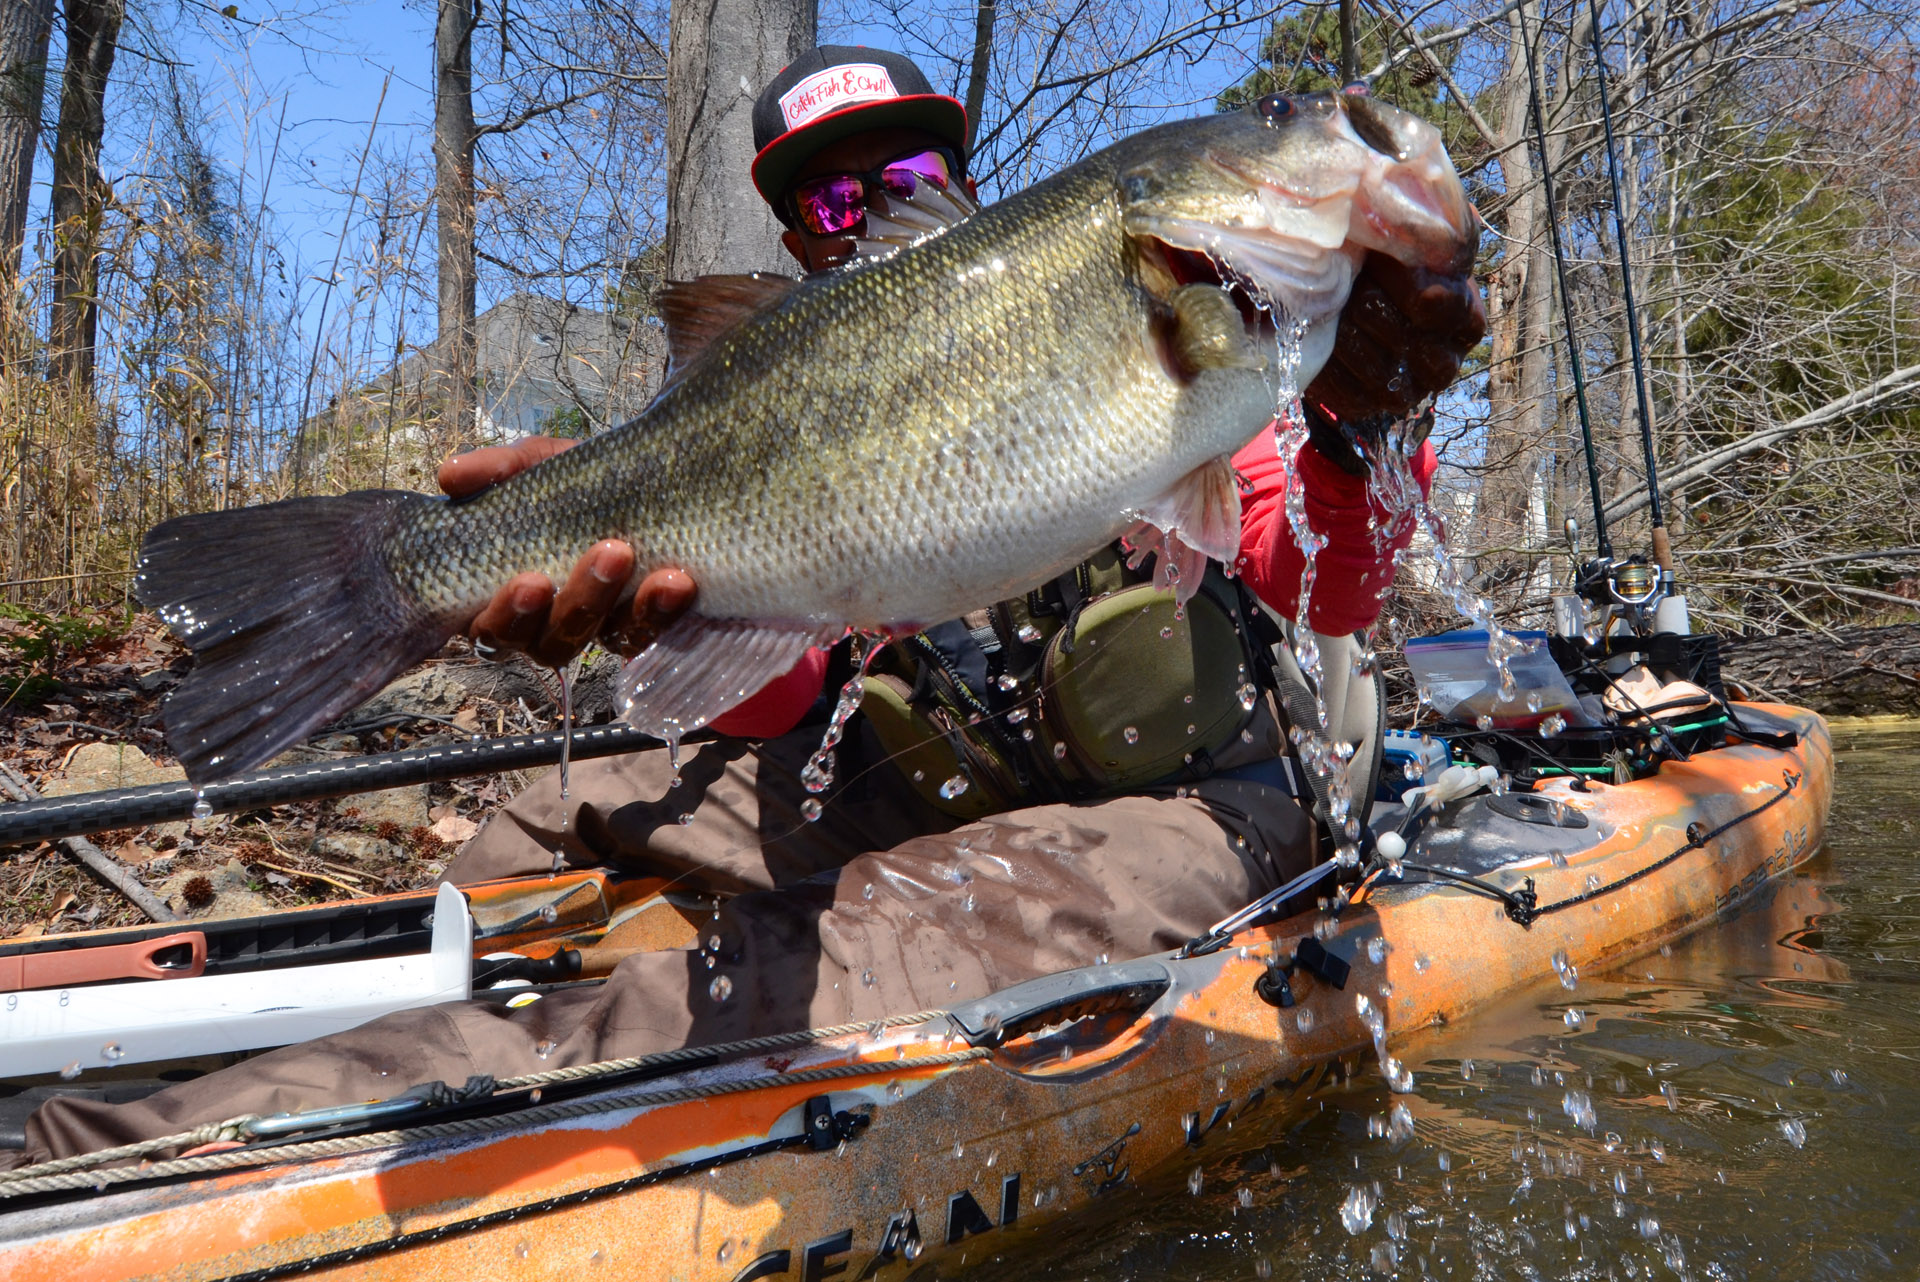 Beginner Kayak Fishing - The Gear You Need to Get Started - Buyers